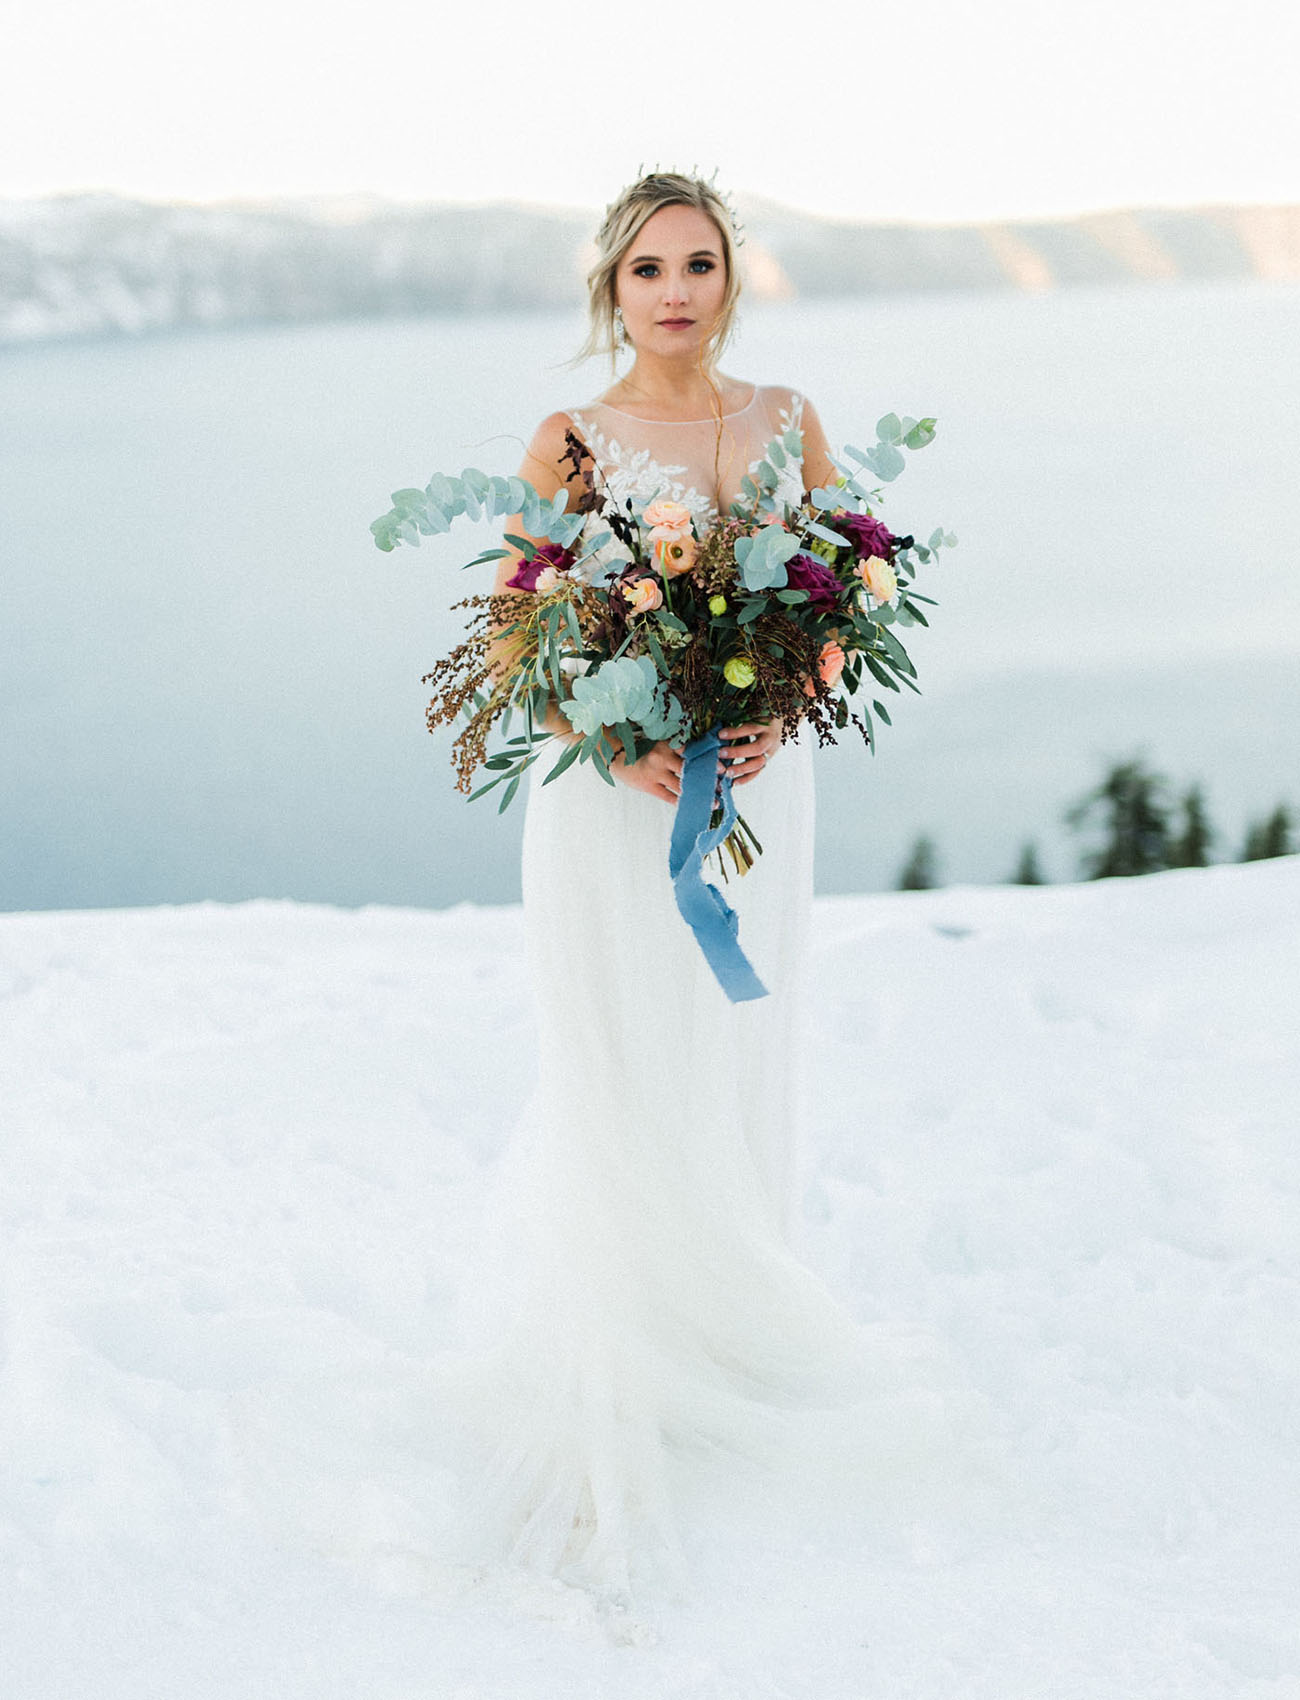 The bride reminded us Elsa from the Frozen and an ice queen at the same time